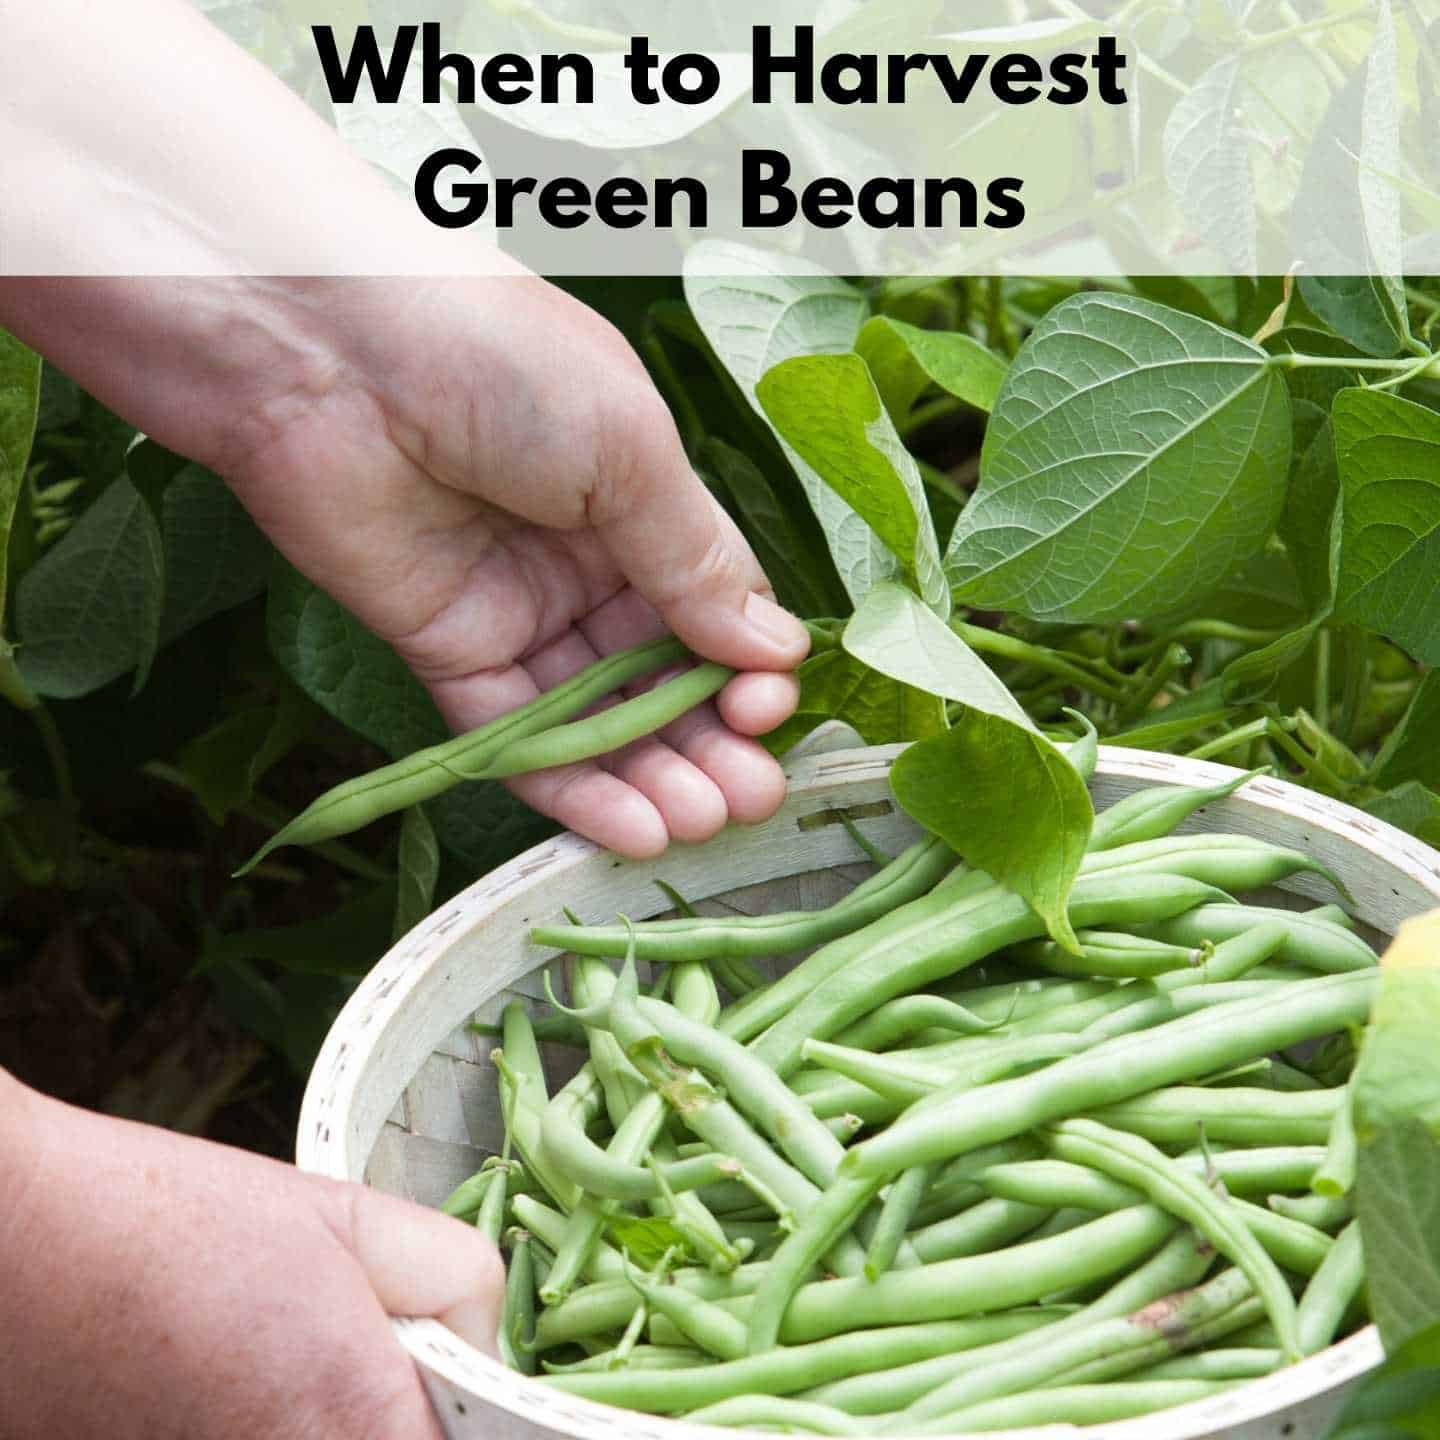 When to Harvest Green Beans - Together Time Family